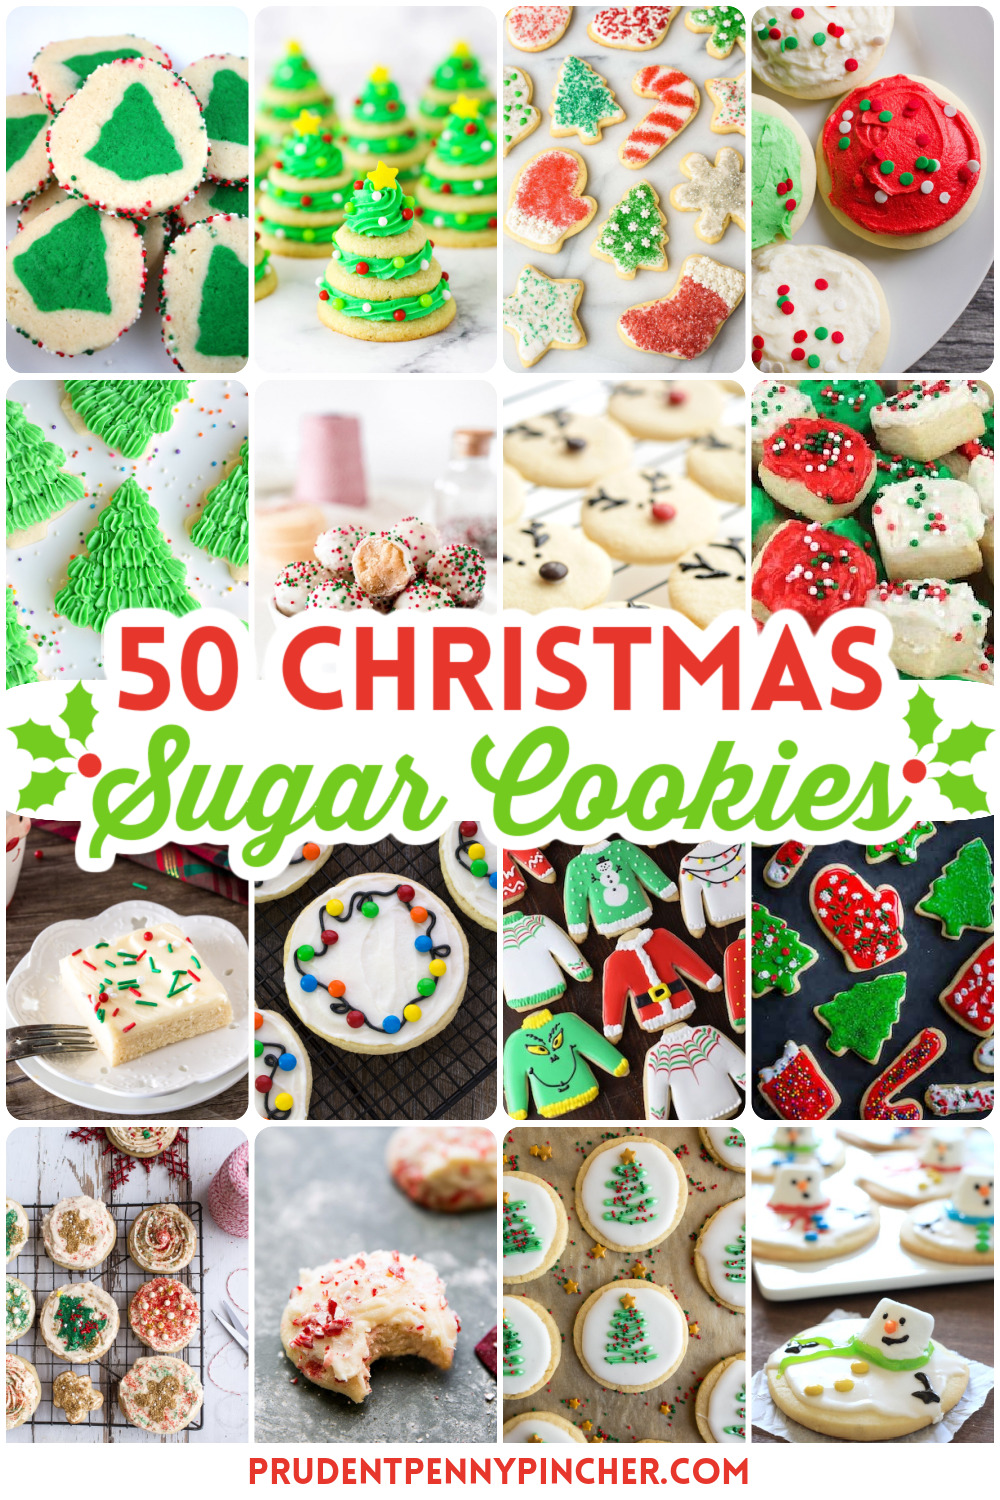 White Chocolate Dipped Peppermint Sugar Cookies - Cooking Classy